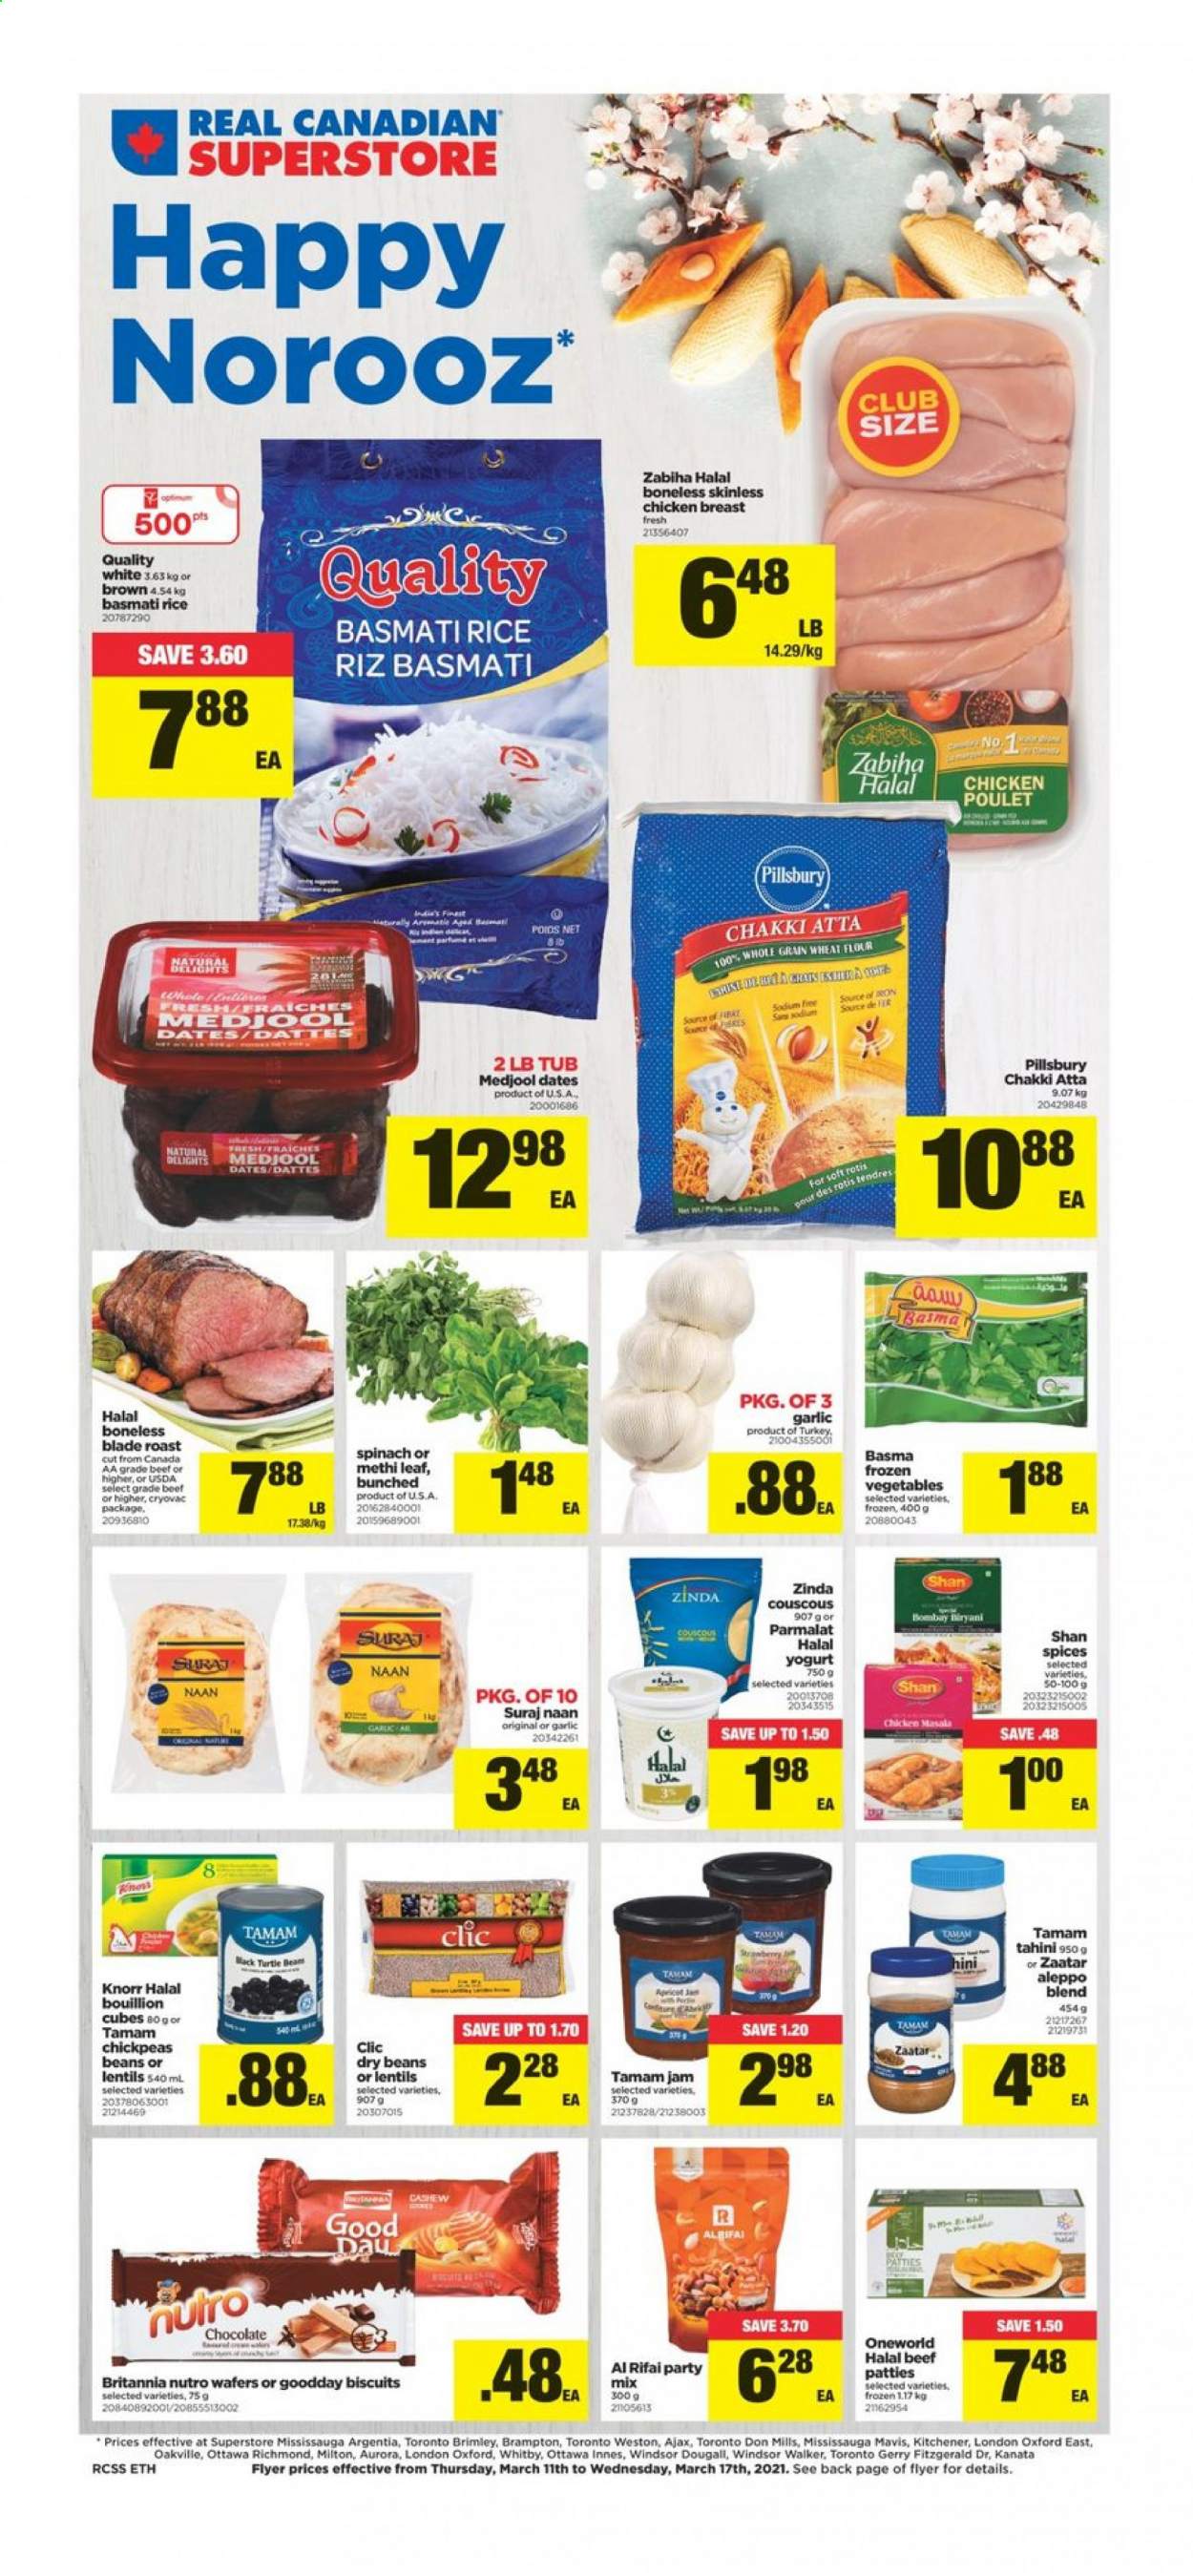 thumbnail - Real Canadian Superstore Flyer - March 11, 2021 - March 17, 2021 - Sales products - beans, garlic, Pillsbury, yoghurt, Parmalat, wafers, chocolate, biscuit, flour, wheat flour, lentils, basmati rice, rice, chickpeas, dry beans, tahini, fruit jam, dried dates, Ron Pelicano, chicken breasts, chicken, Ajax, Knorr. Page 1.